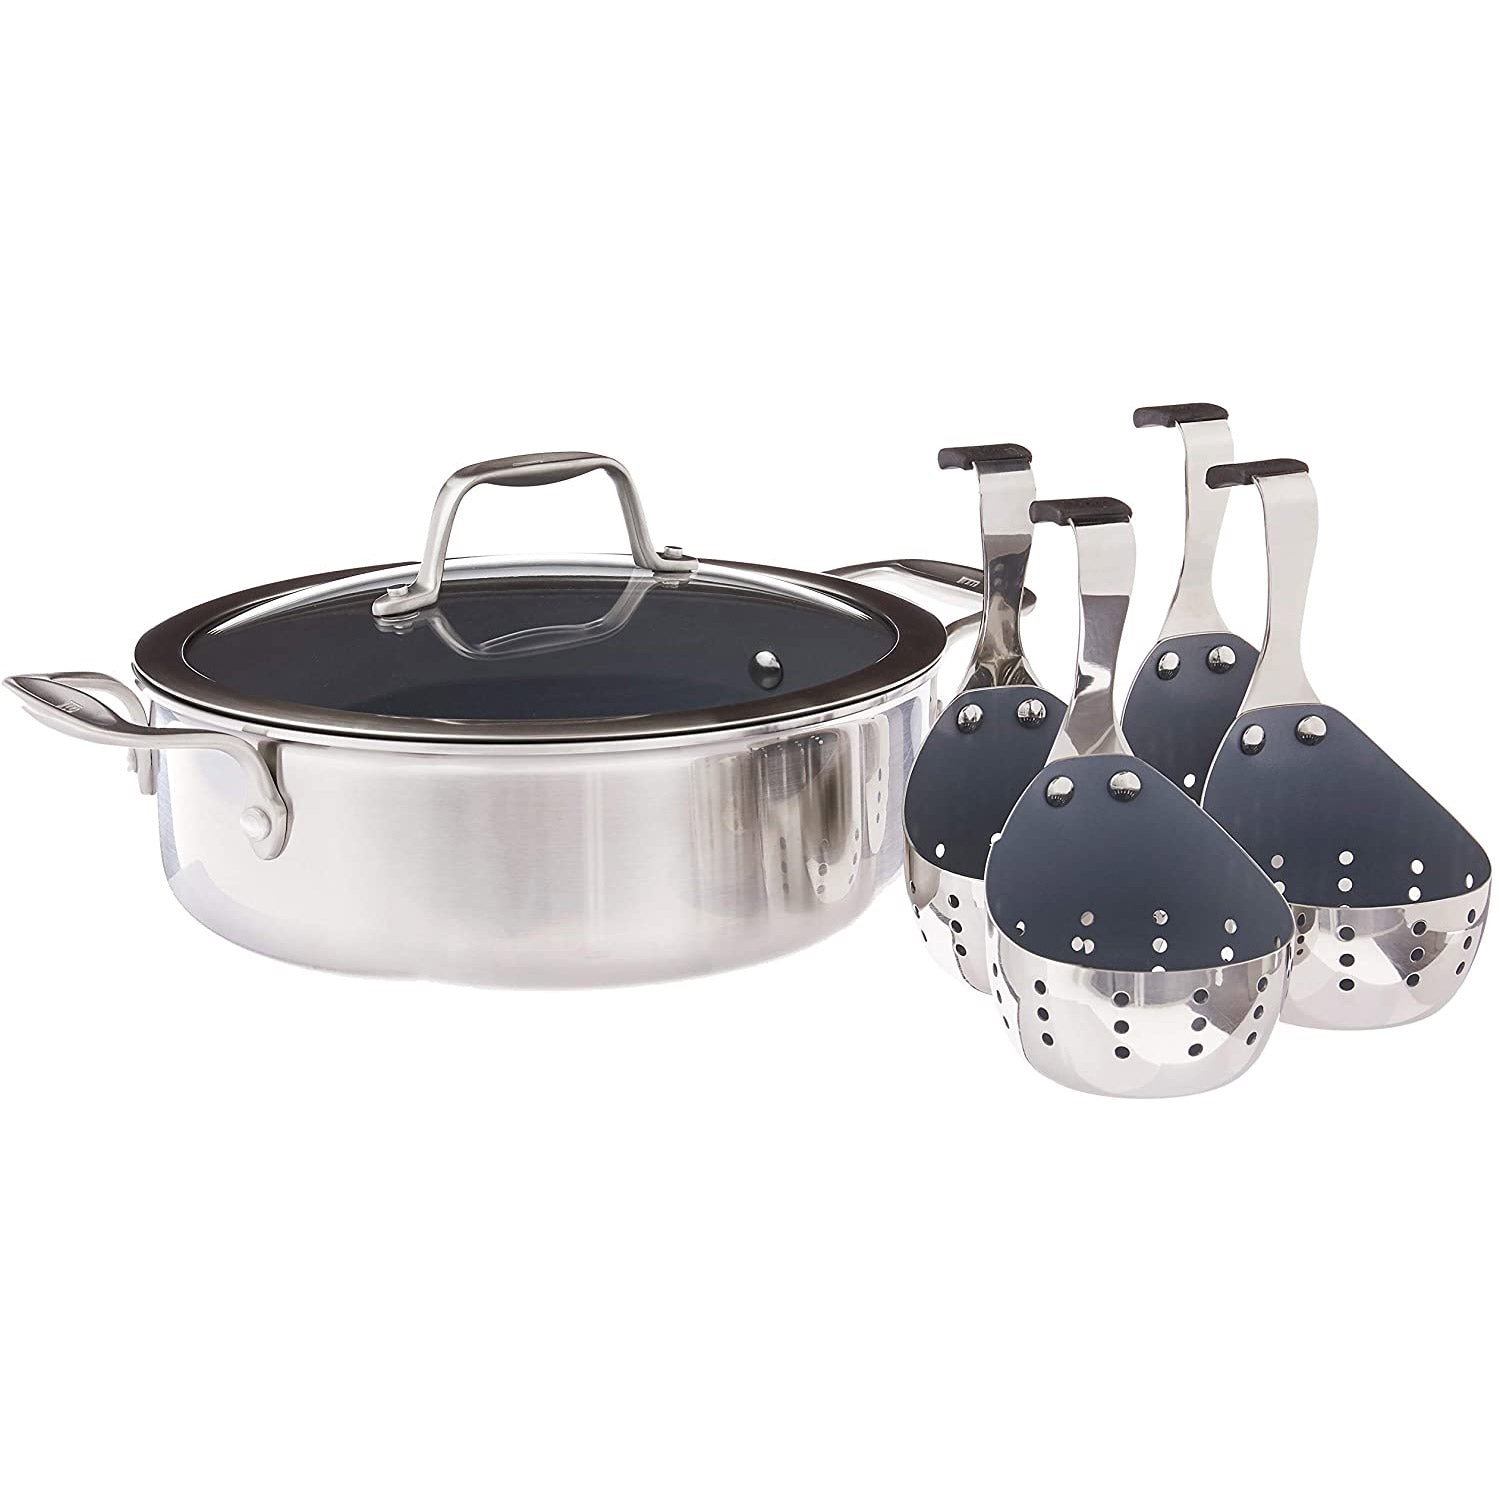 ZWILLING Spirit Stainless Stainless Steel Cookware Set, 12 pc